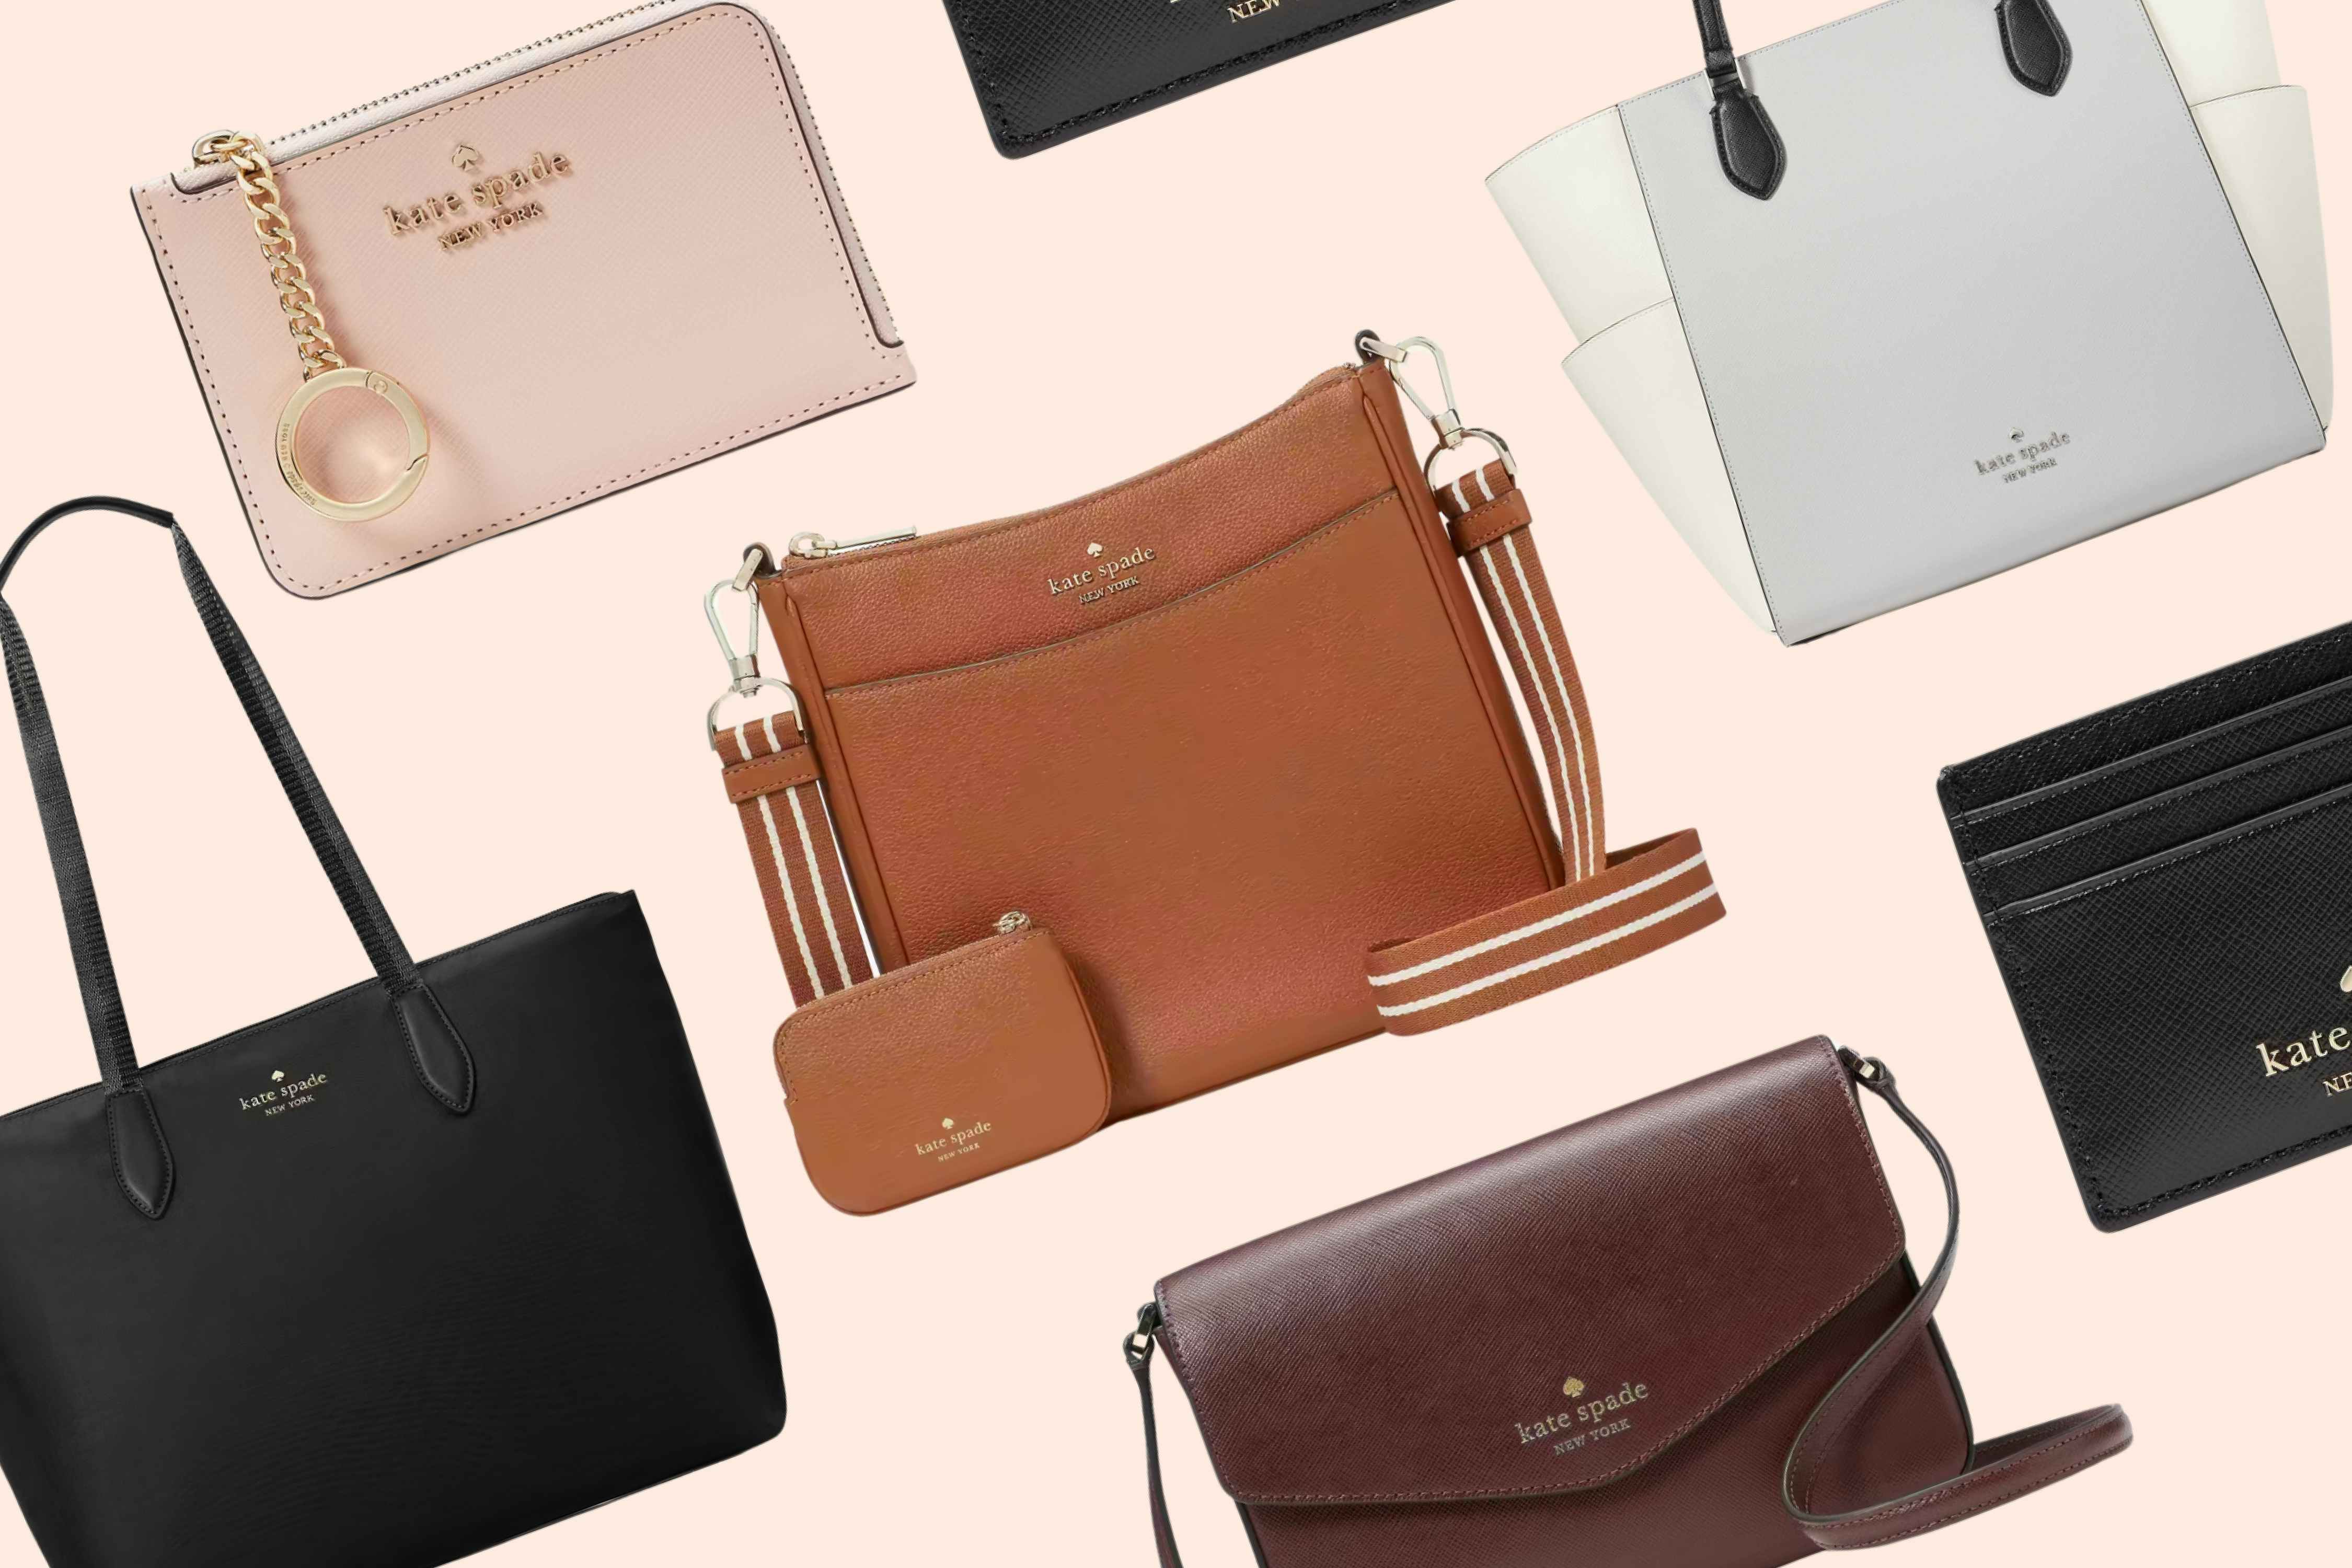 Kate Spade Sale on 180+ Styles: $75 Leather Bag, $55 Wallet - Last Day